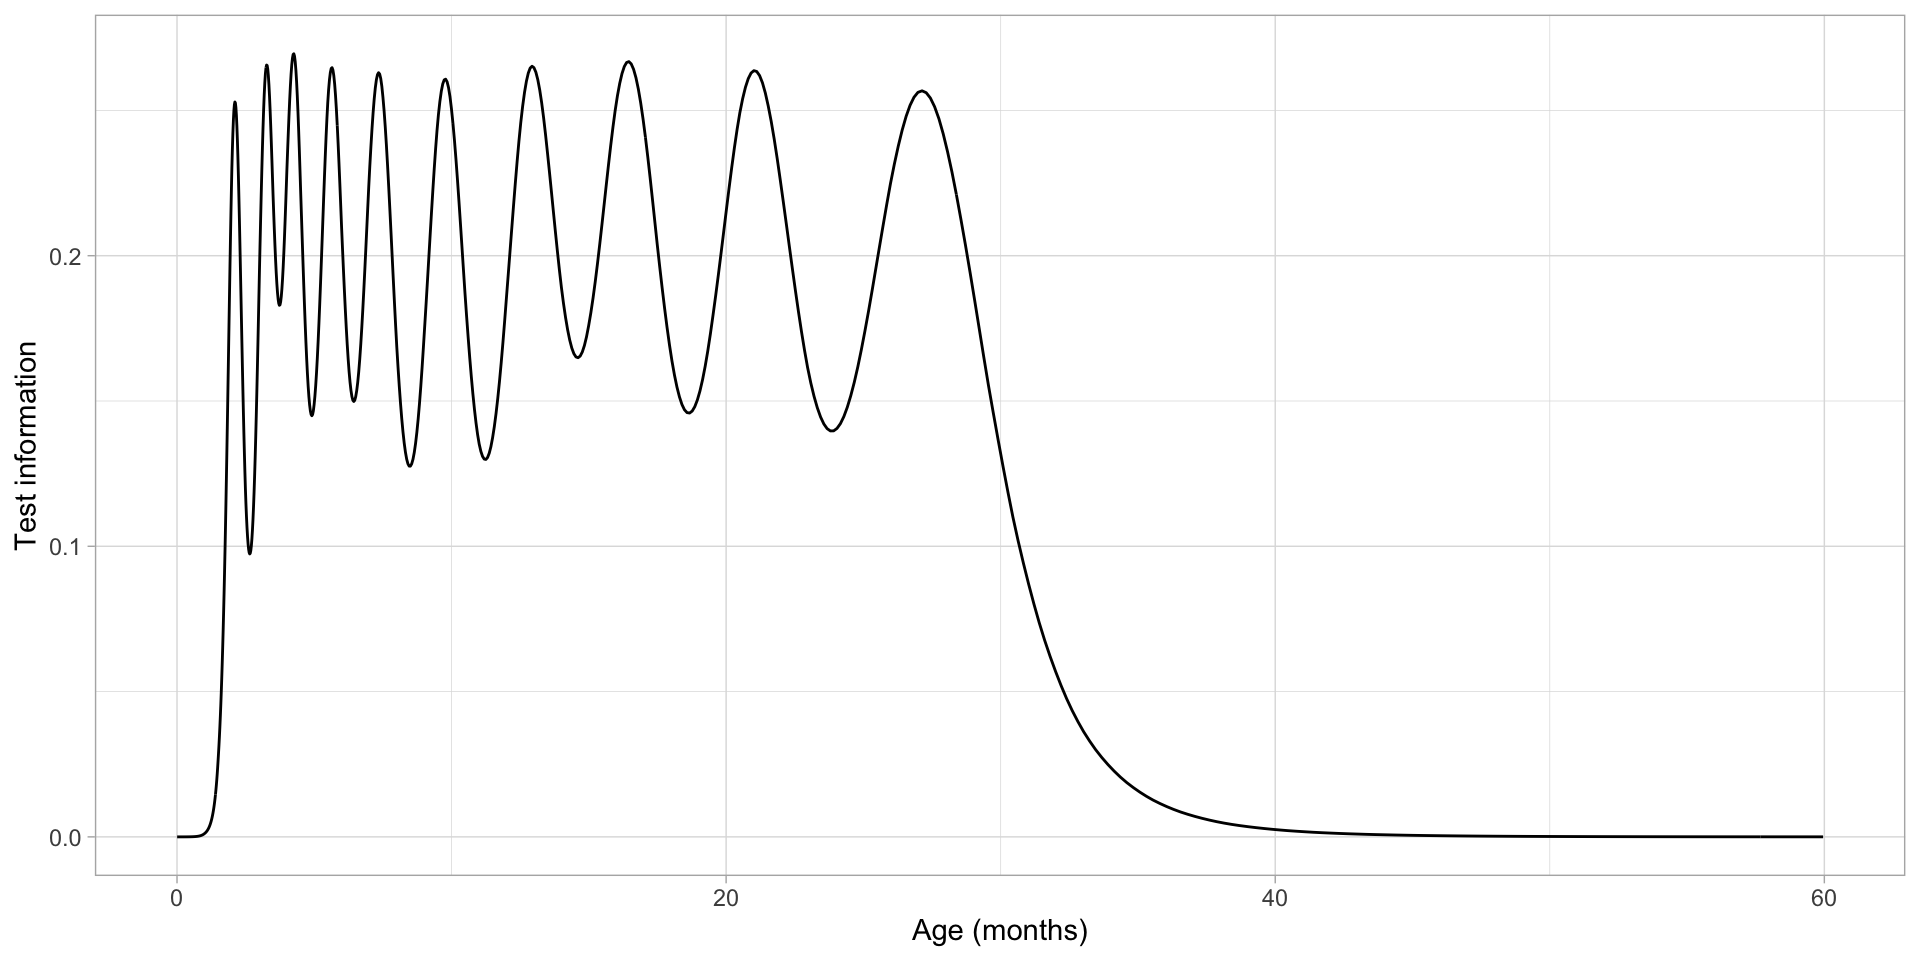 Test information by age for a set of 10 items evenly distributed over the \(D\)-score scale.